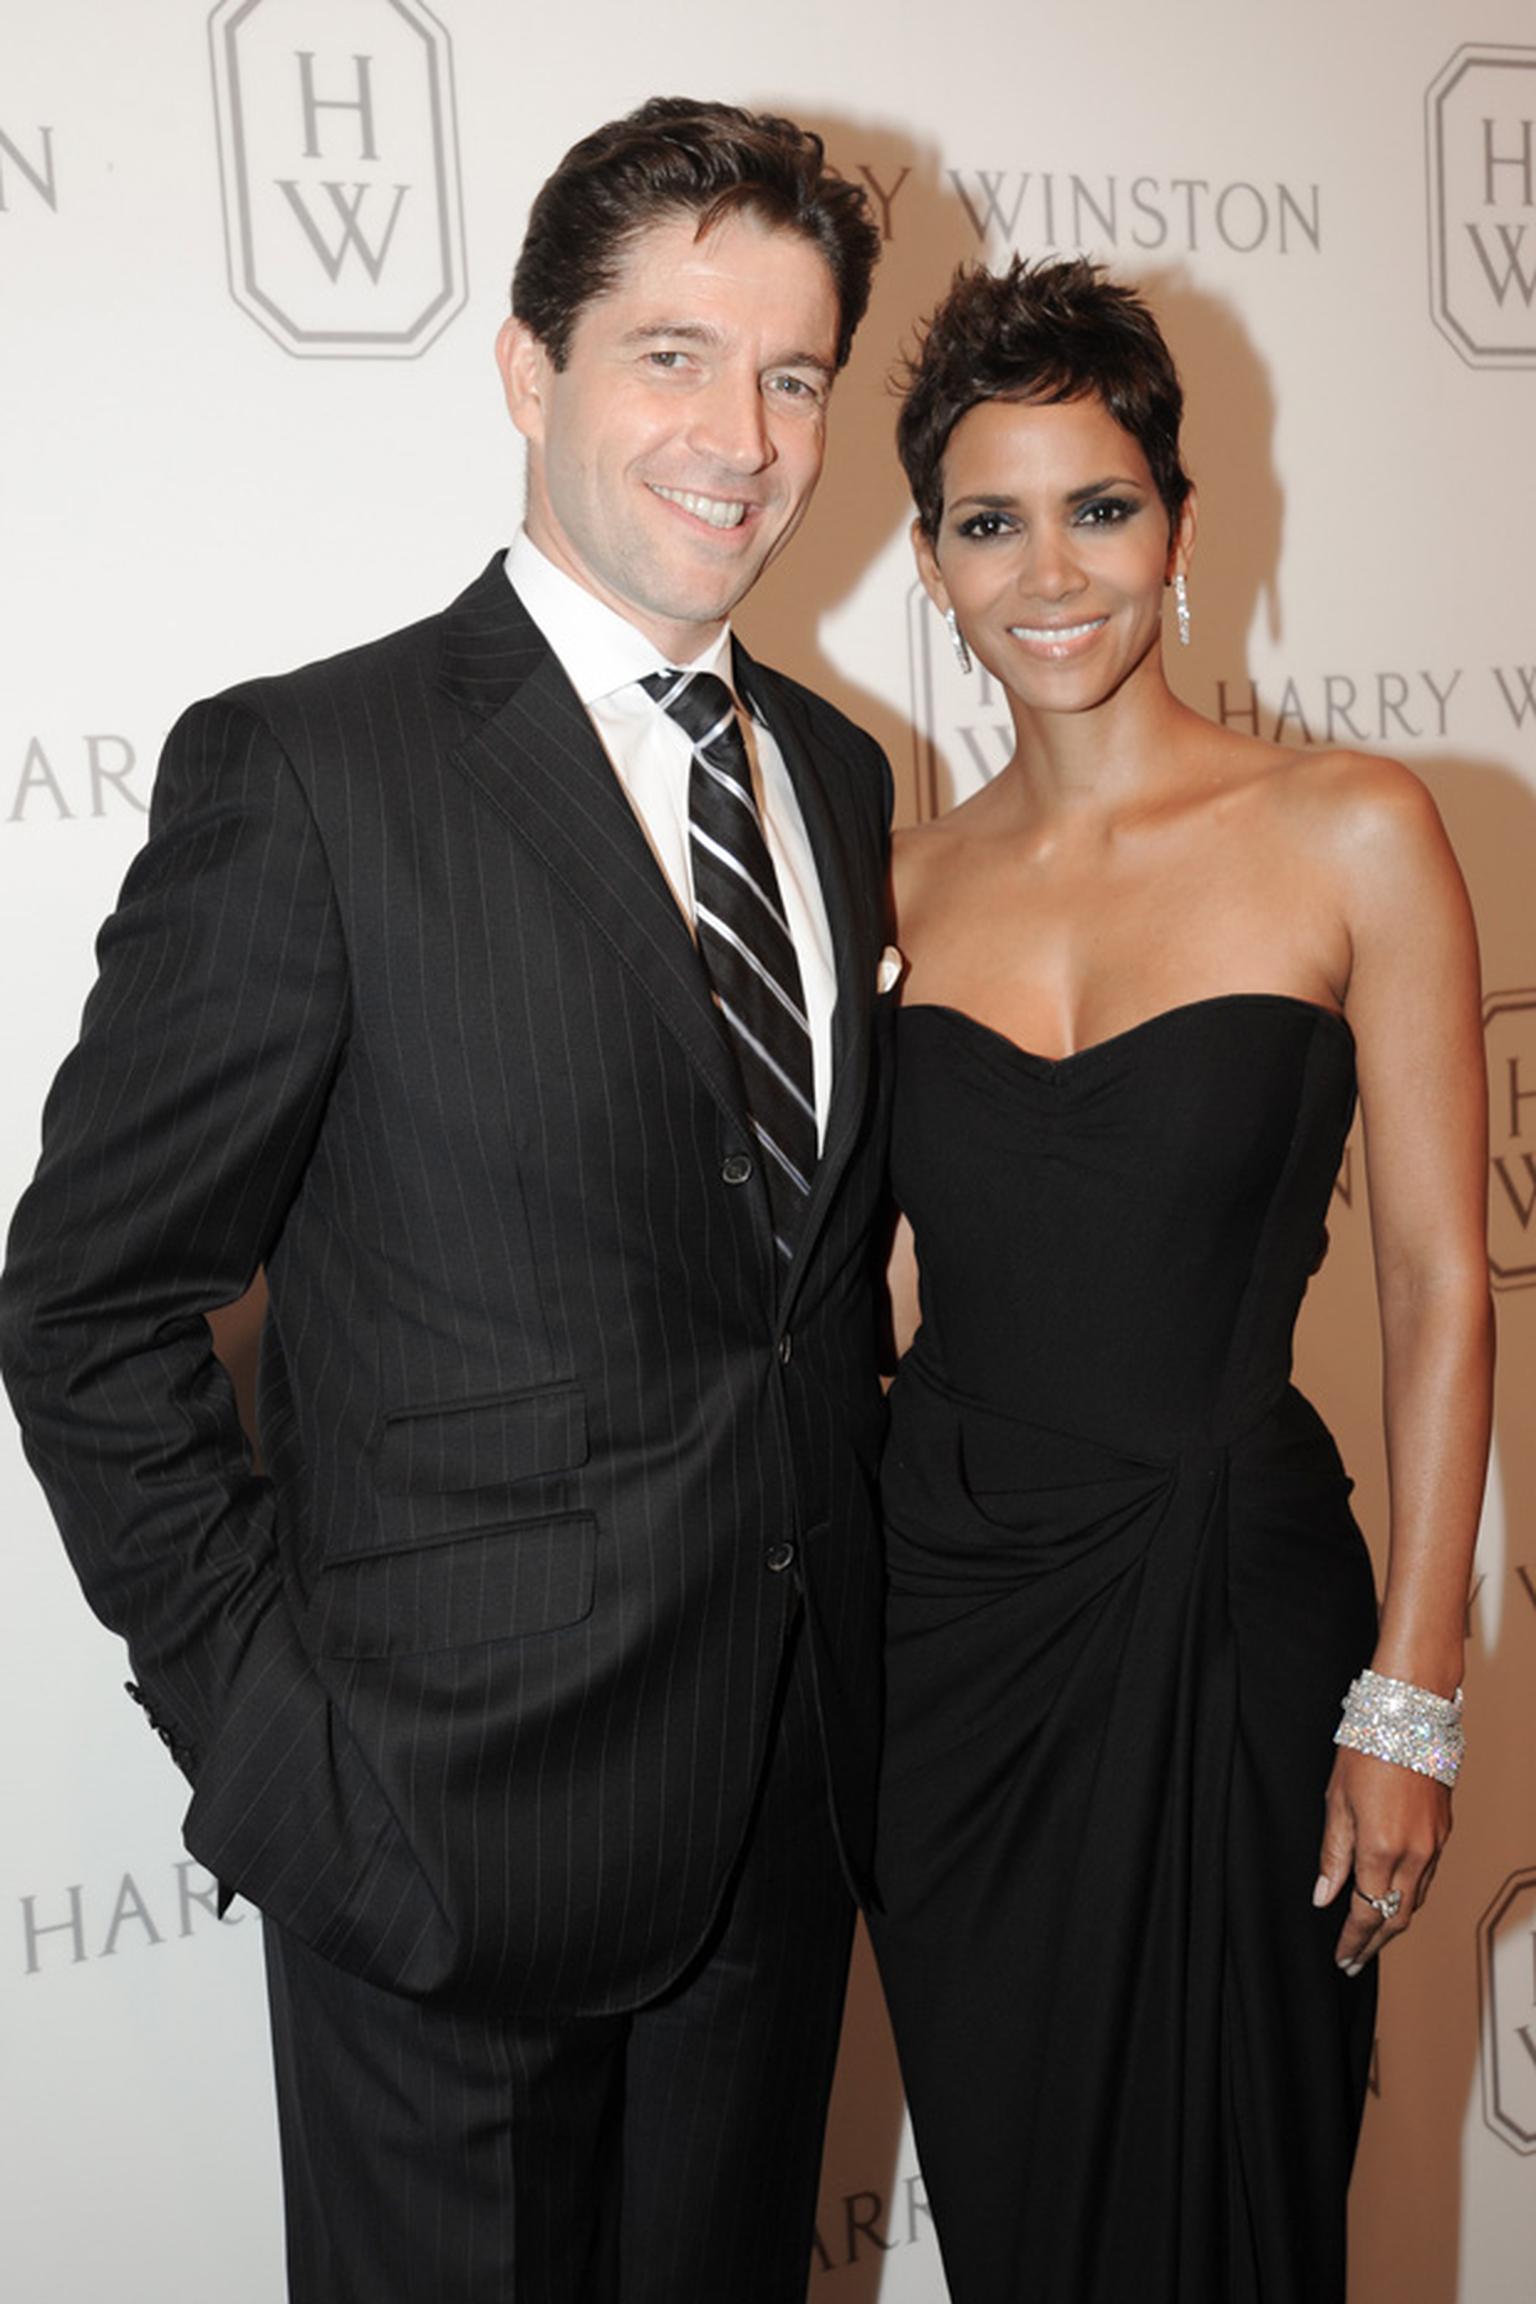 Frédéric de Narp,President & CEO, Harry Winston & Halle Berry at Court of Jewels